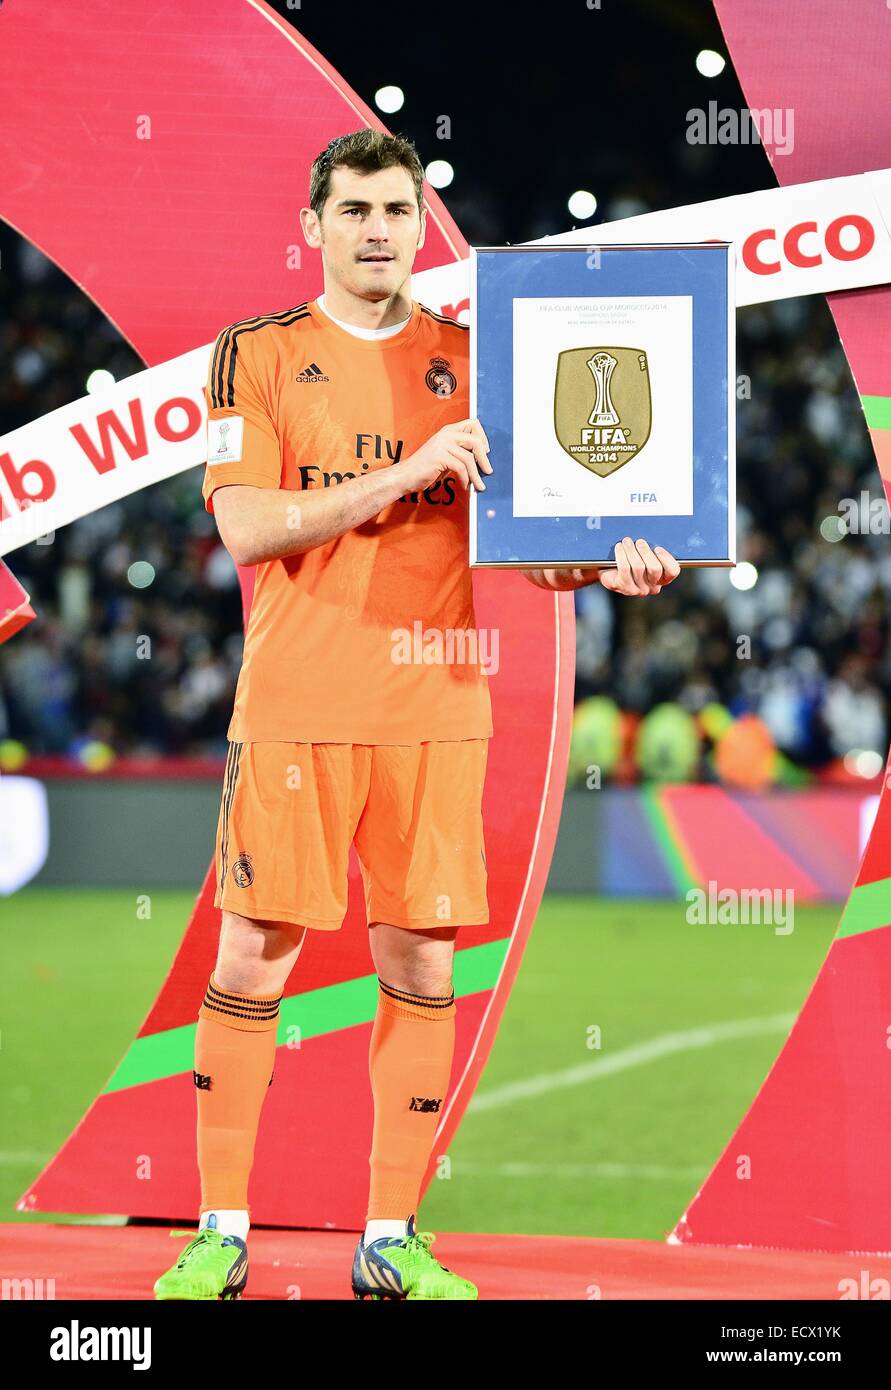 Marrakech, Morocco. 20th Dec, 2014. Real Madrid goalkeeper IKER CASILLAS with the FIFA World Champions Badge honours Real Madrid's impeccable year. Credit:  Marcio Machado/ZUMA Wire/Alamy Live News Stock Photo